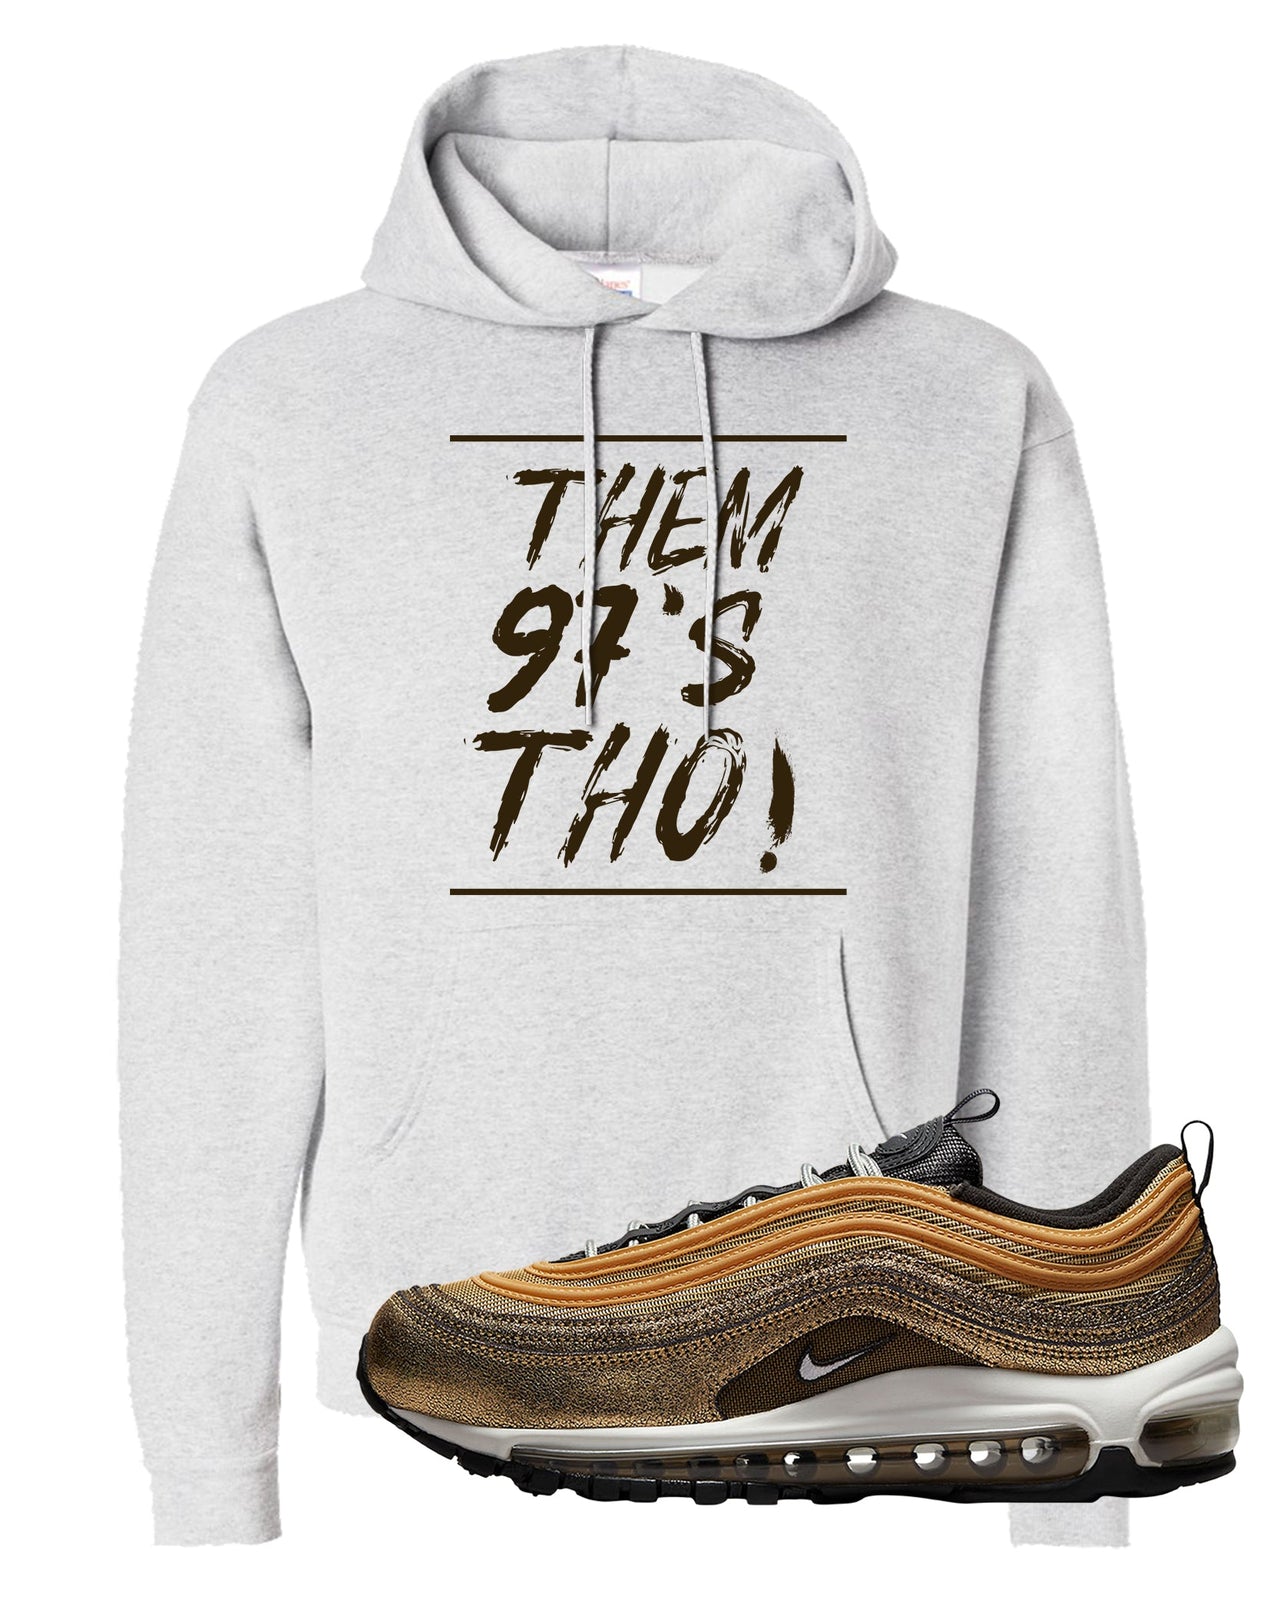 Golden Gals 97s Hoodie | Them 97's Tho, Ash